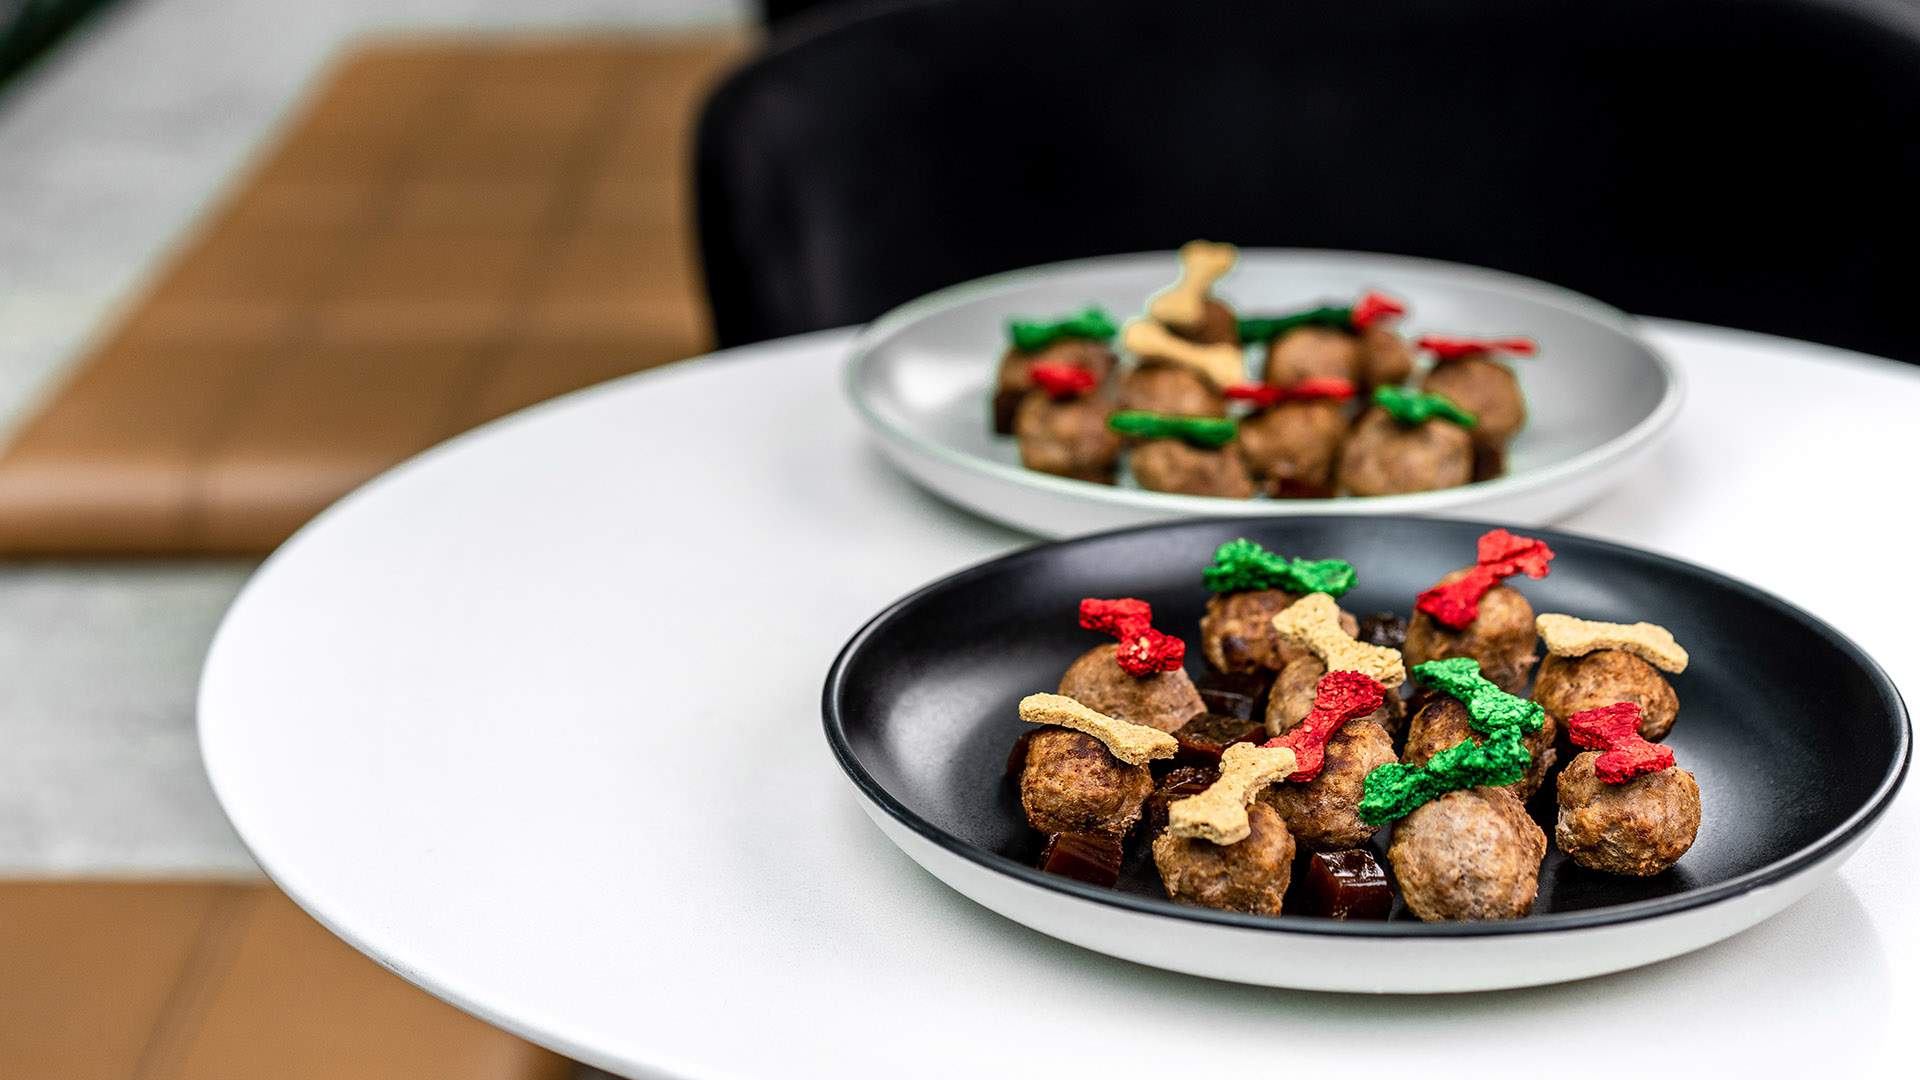 The Westin Brisbane's Cafe and Lobby Bar Has Launched a Fine-Dining 'Pupfast' Menu for Dogs